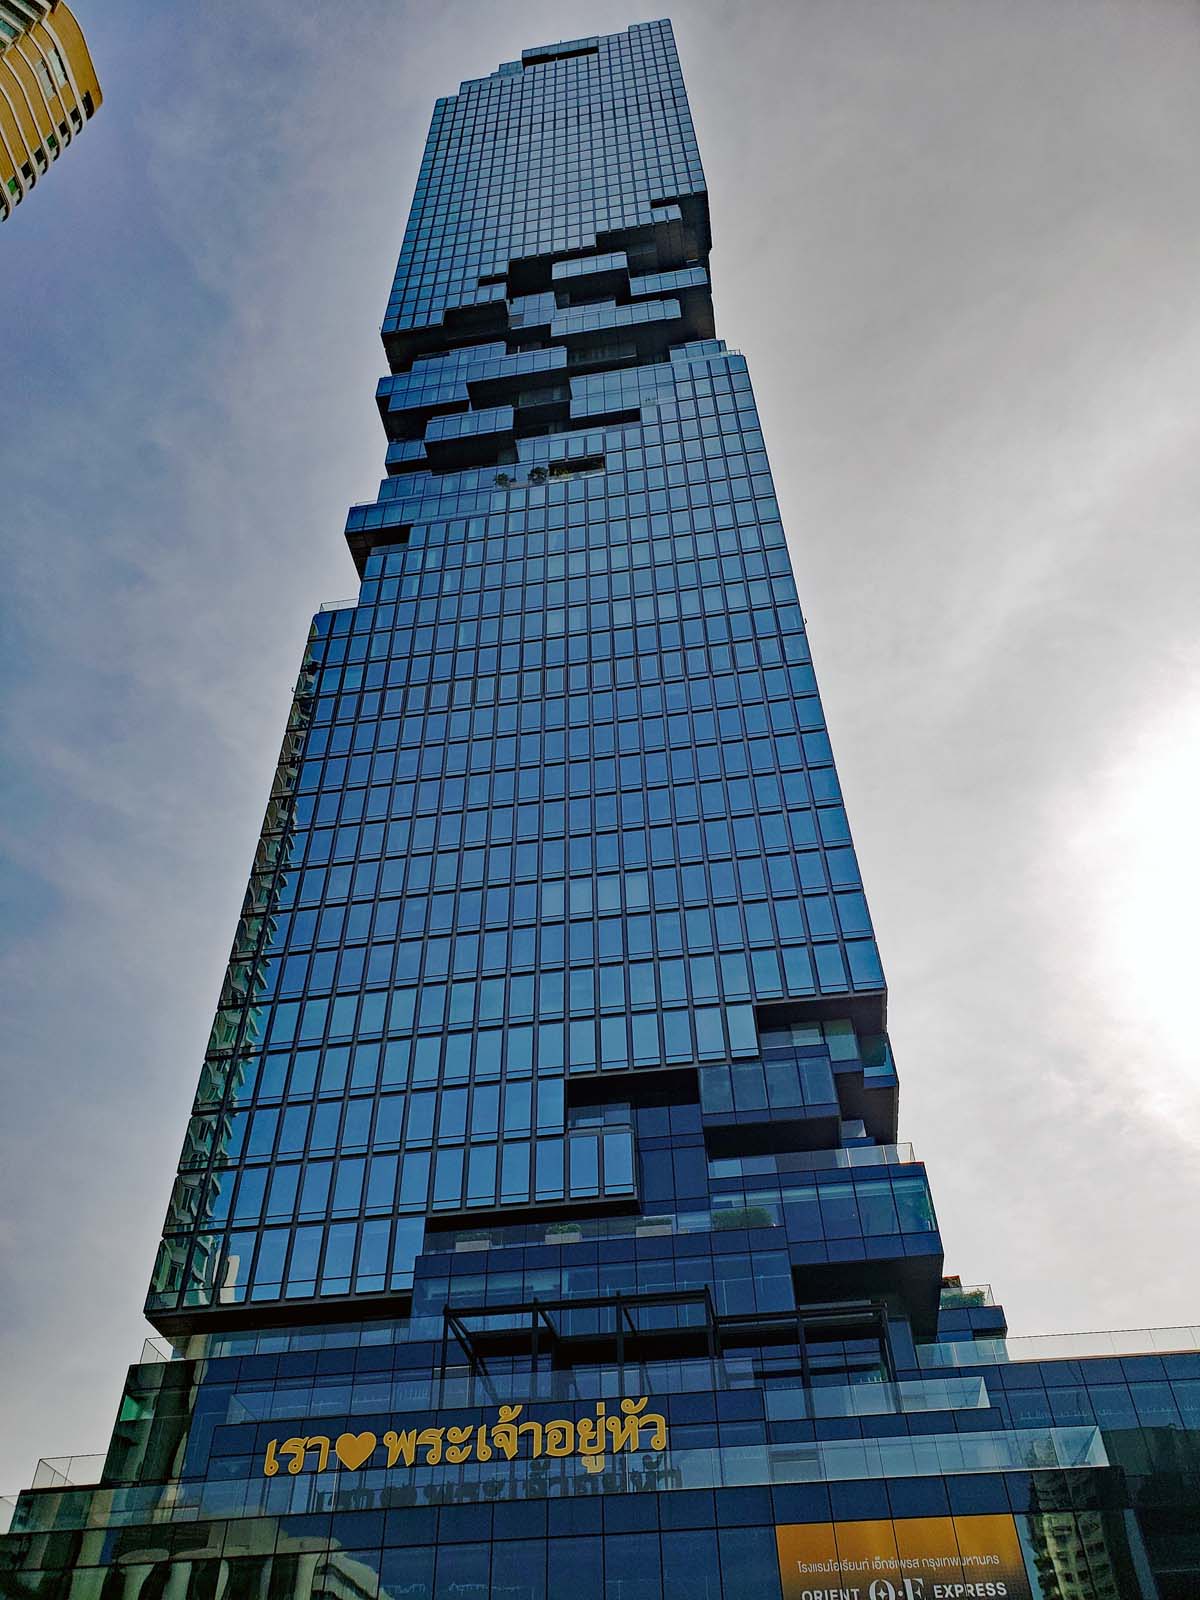 Mahanakhon up close, with the “twisted” body.